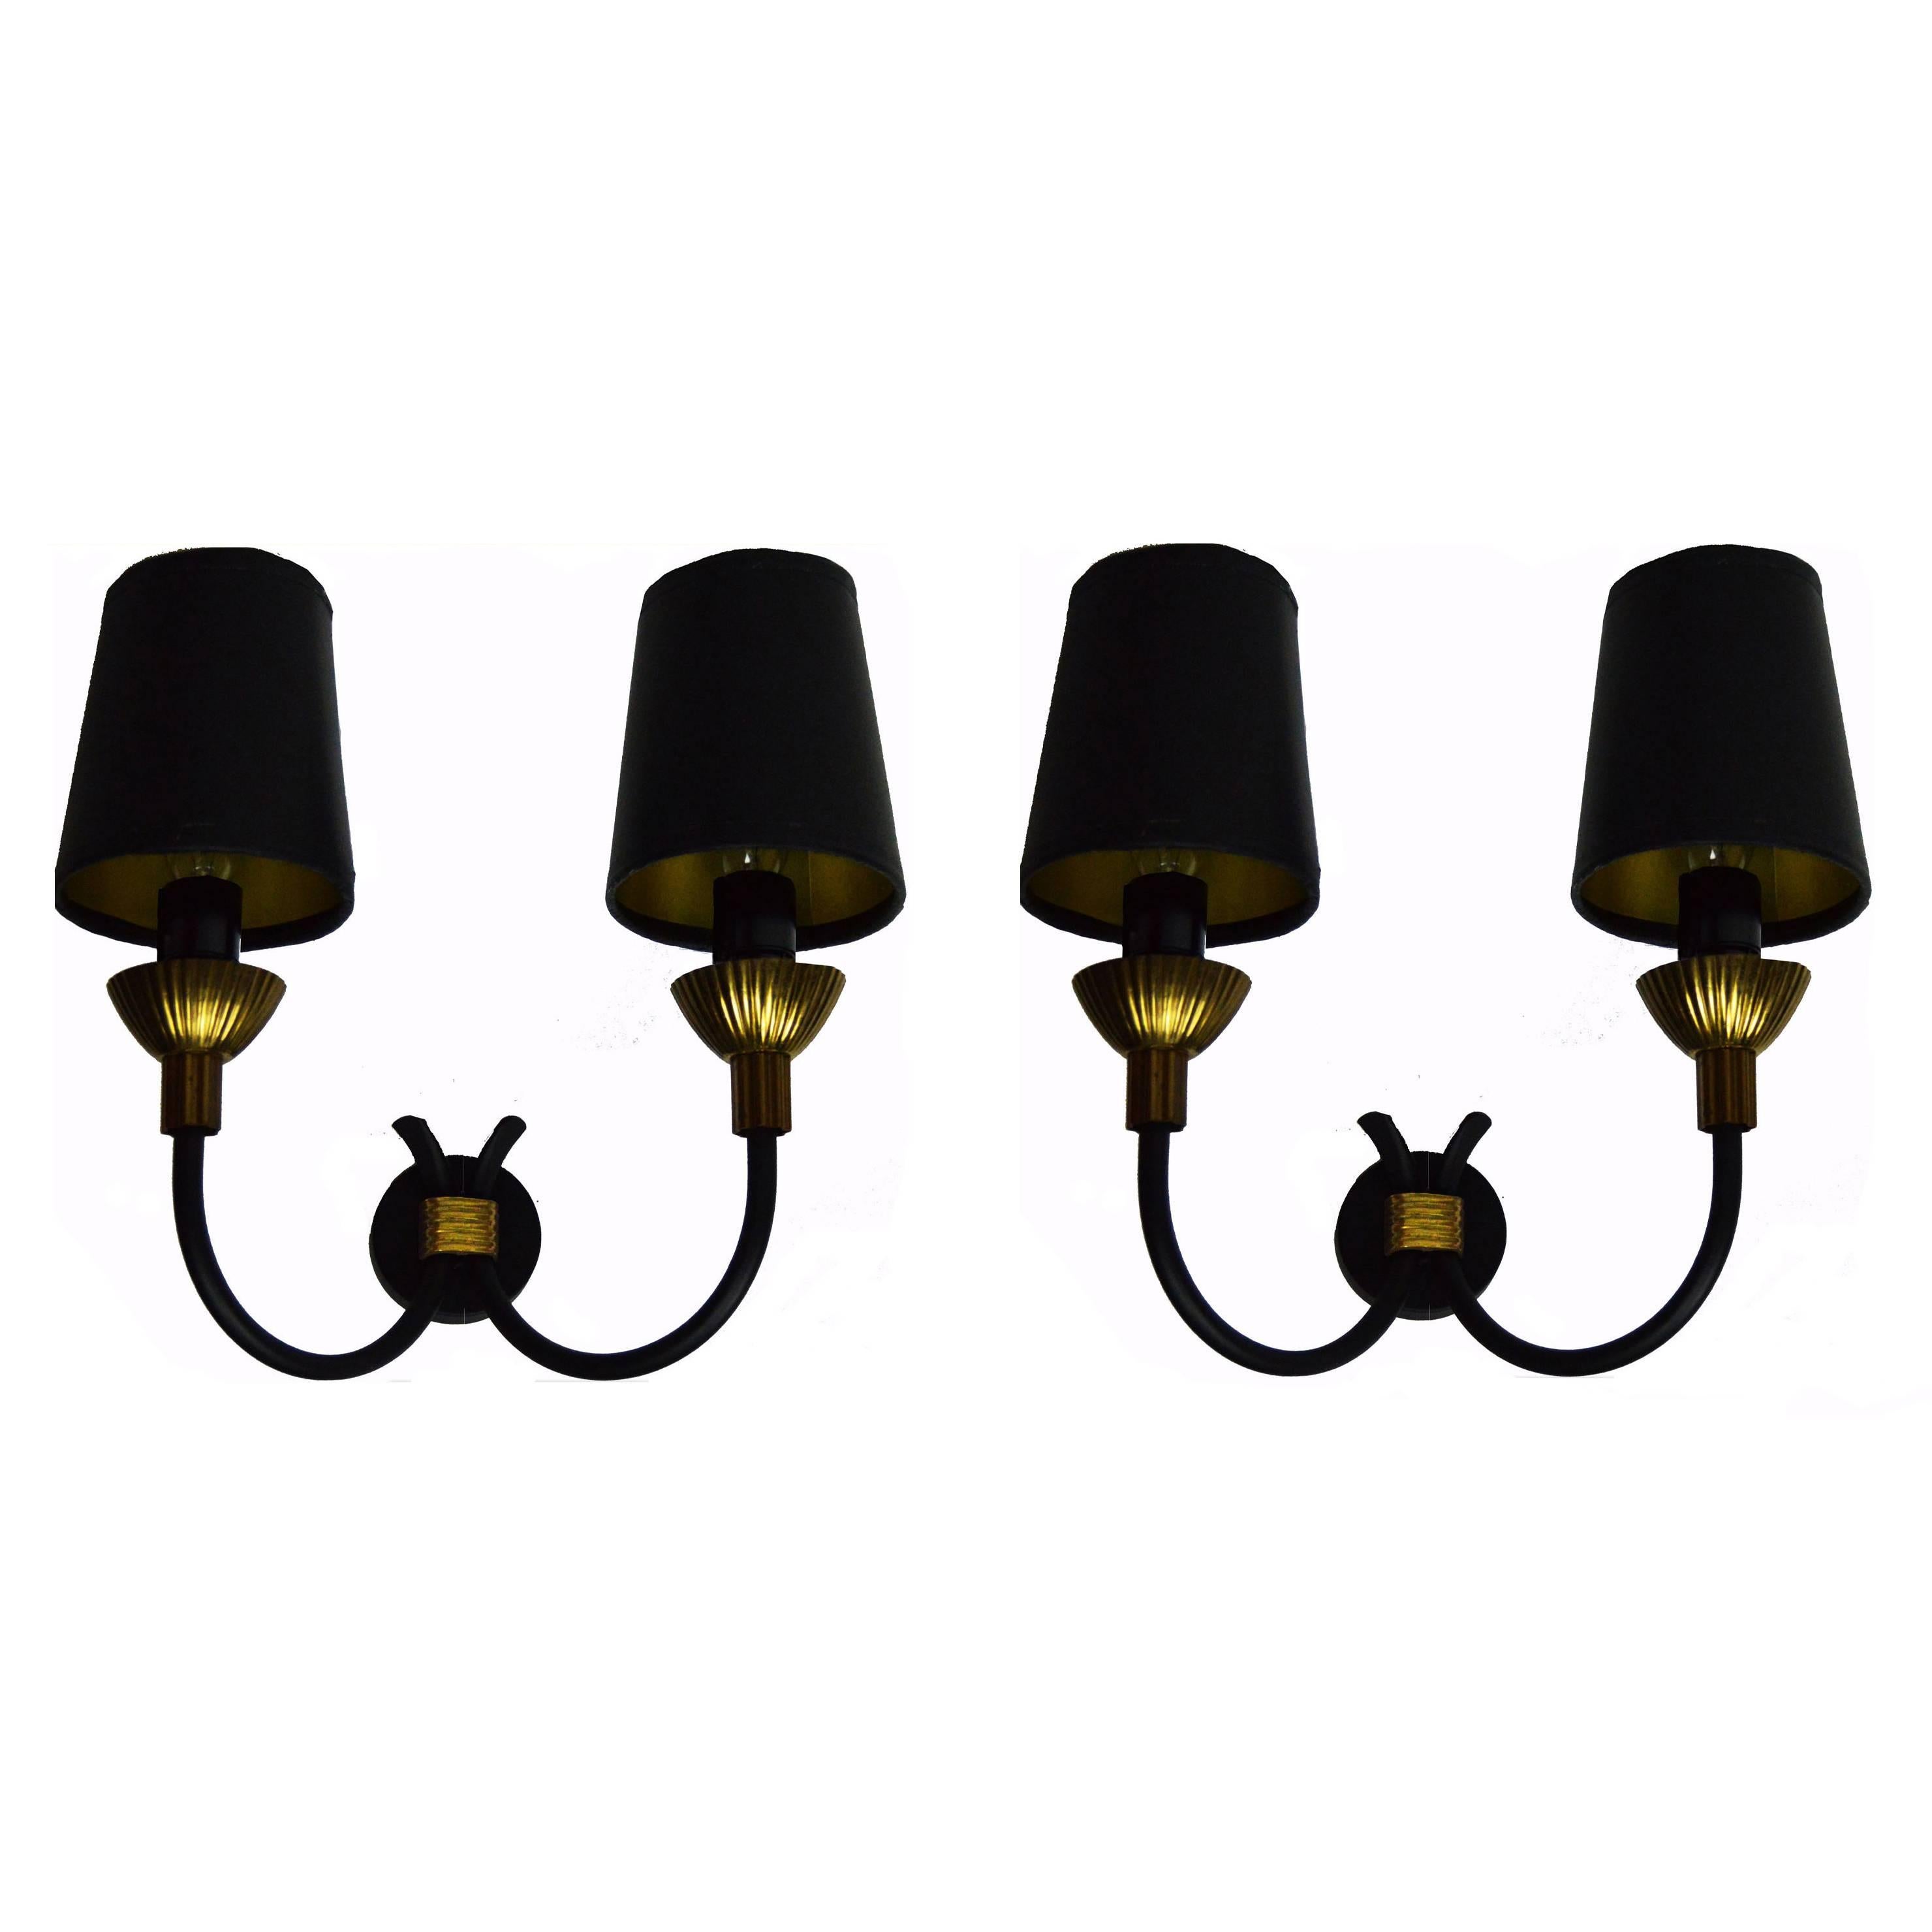 Maison Lunel Sconces Price for one sconce. For Sale